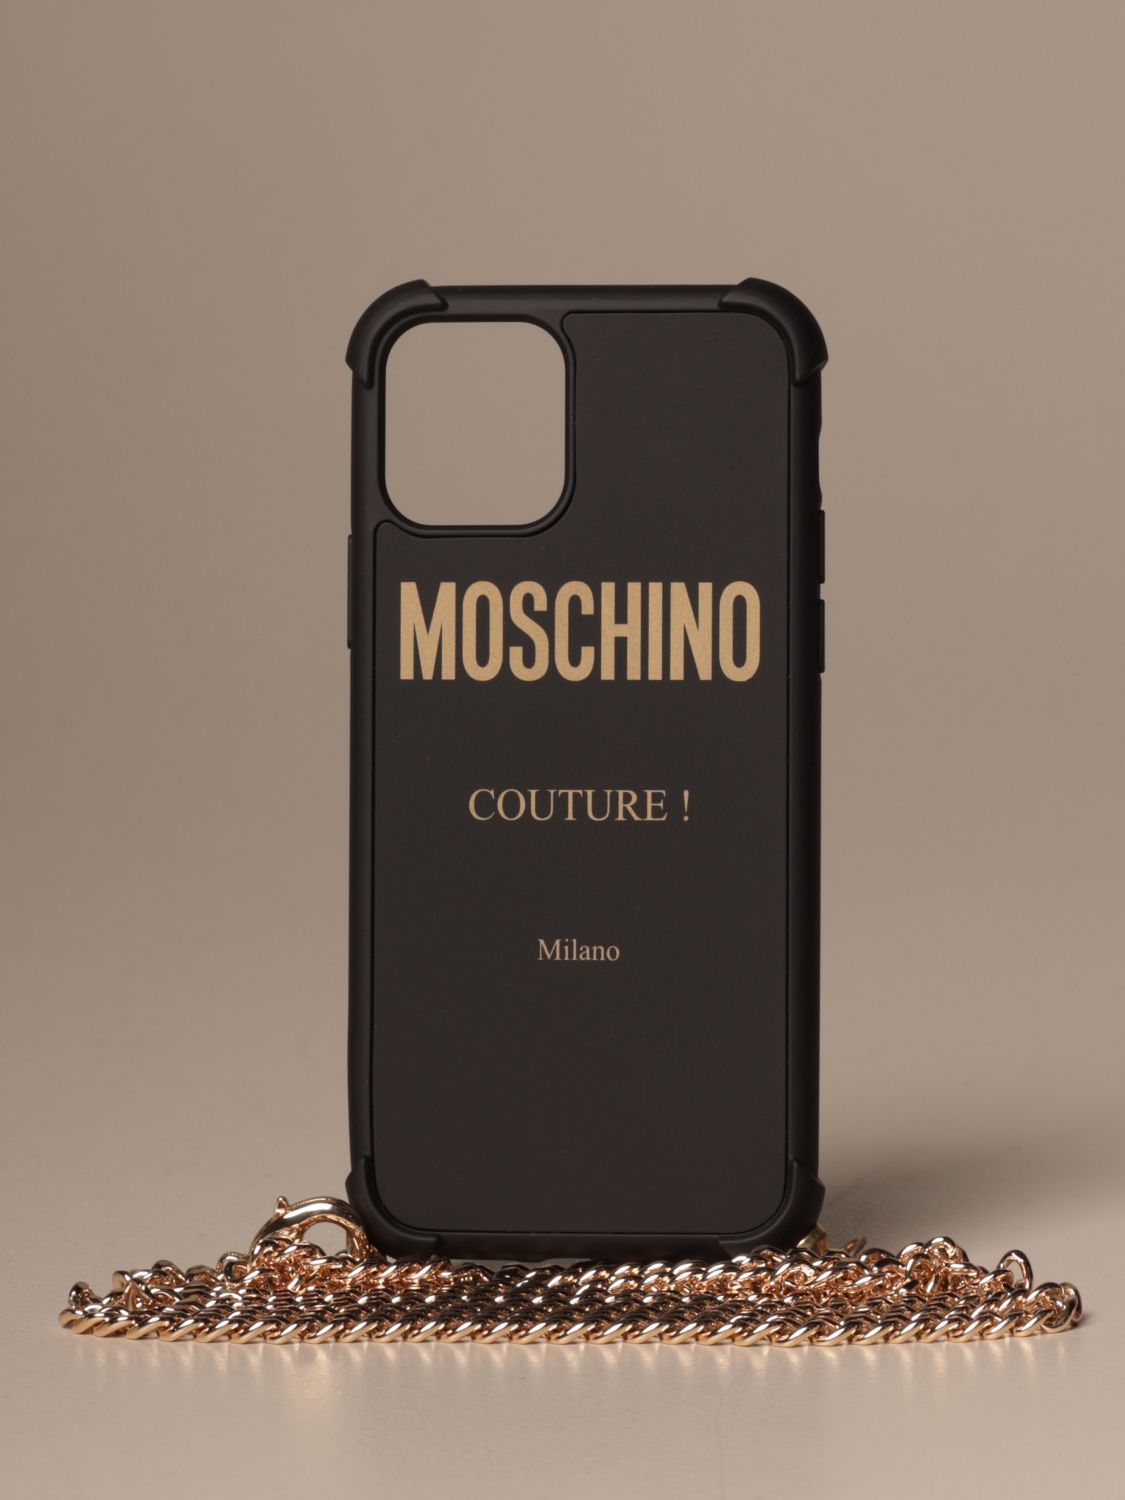 Moschino Couture Iphone 11 Pro Cover Case Moschino Couture Women Black Case Moschino Couture 7942 04 Giglio En